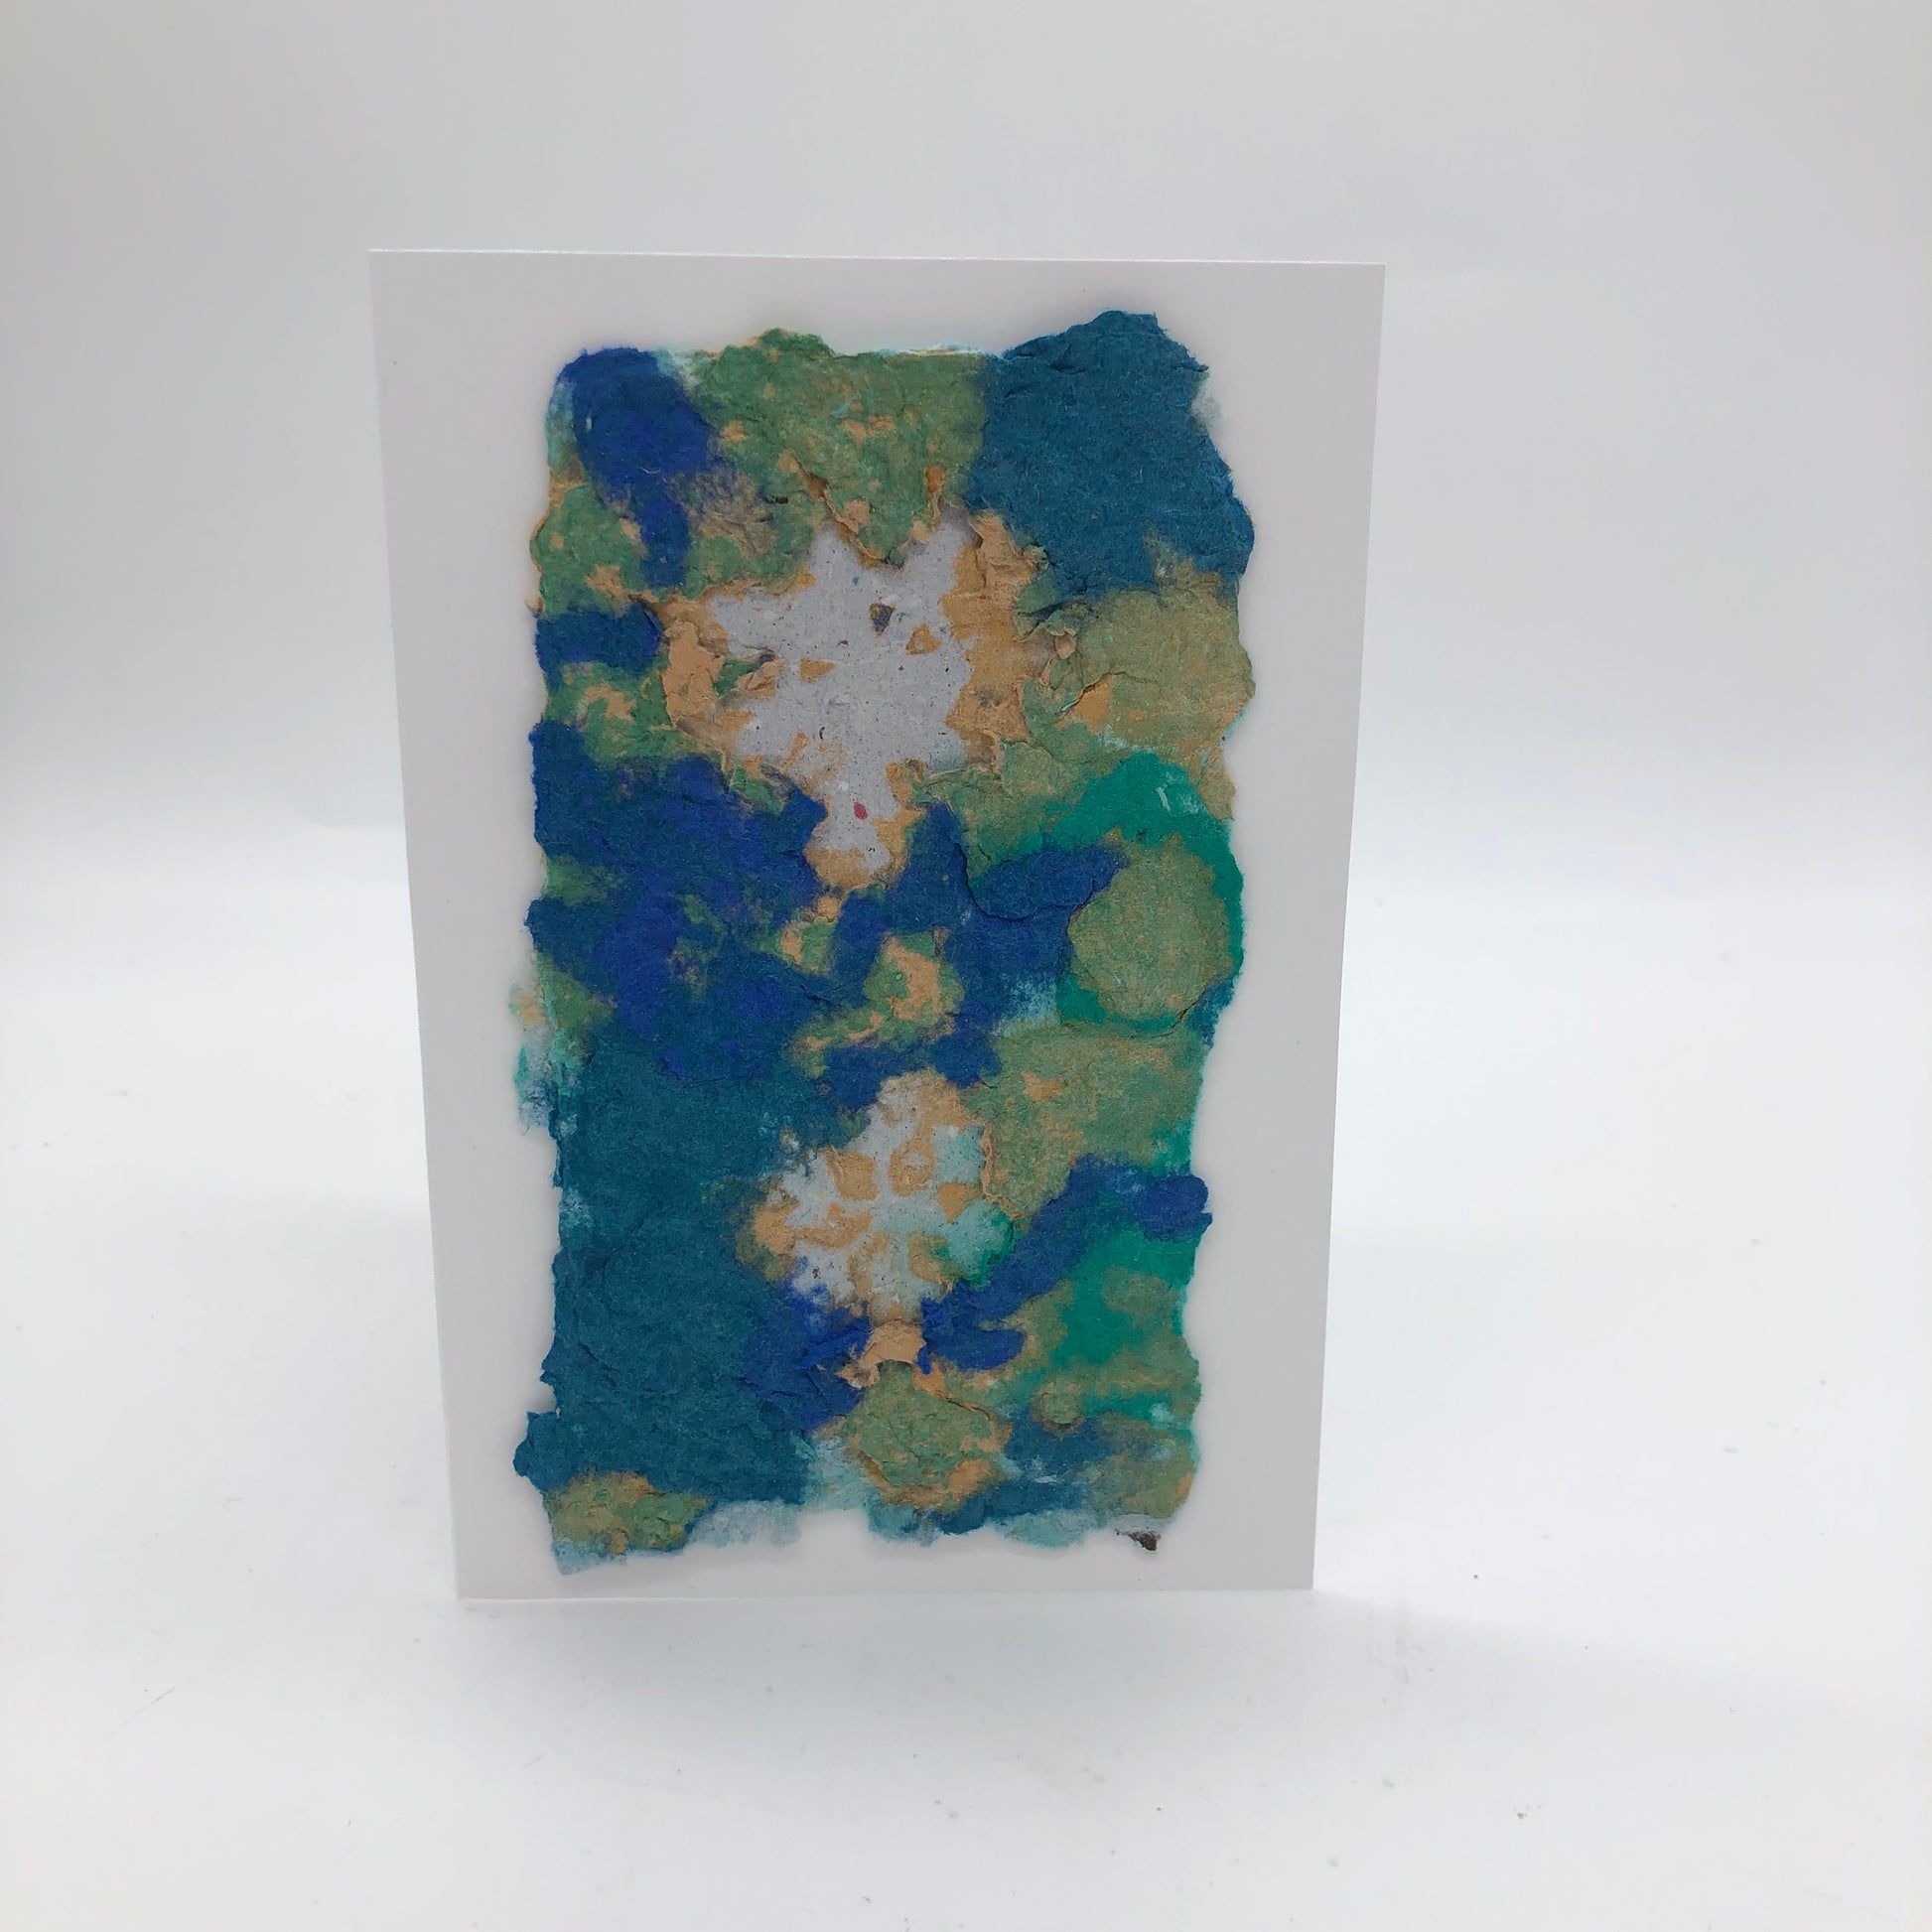 Handmade paper greeting card with cream, aqua and blue background with two white snowflakes